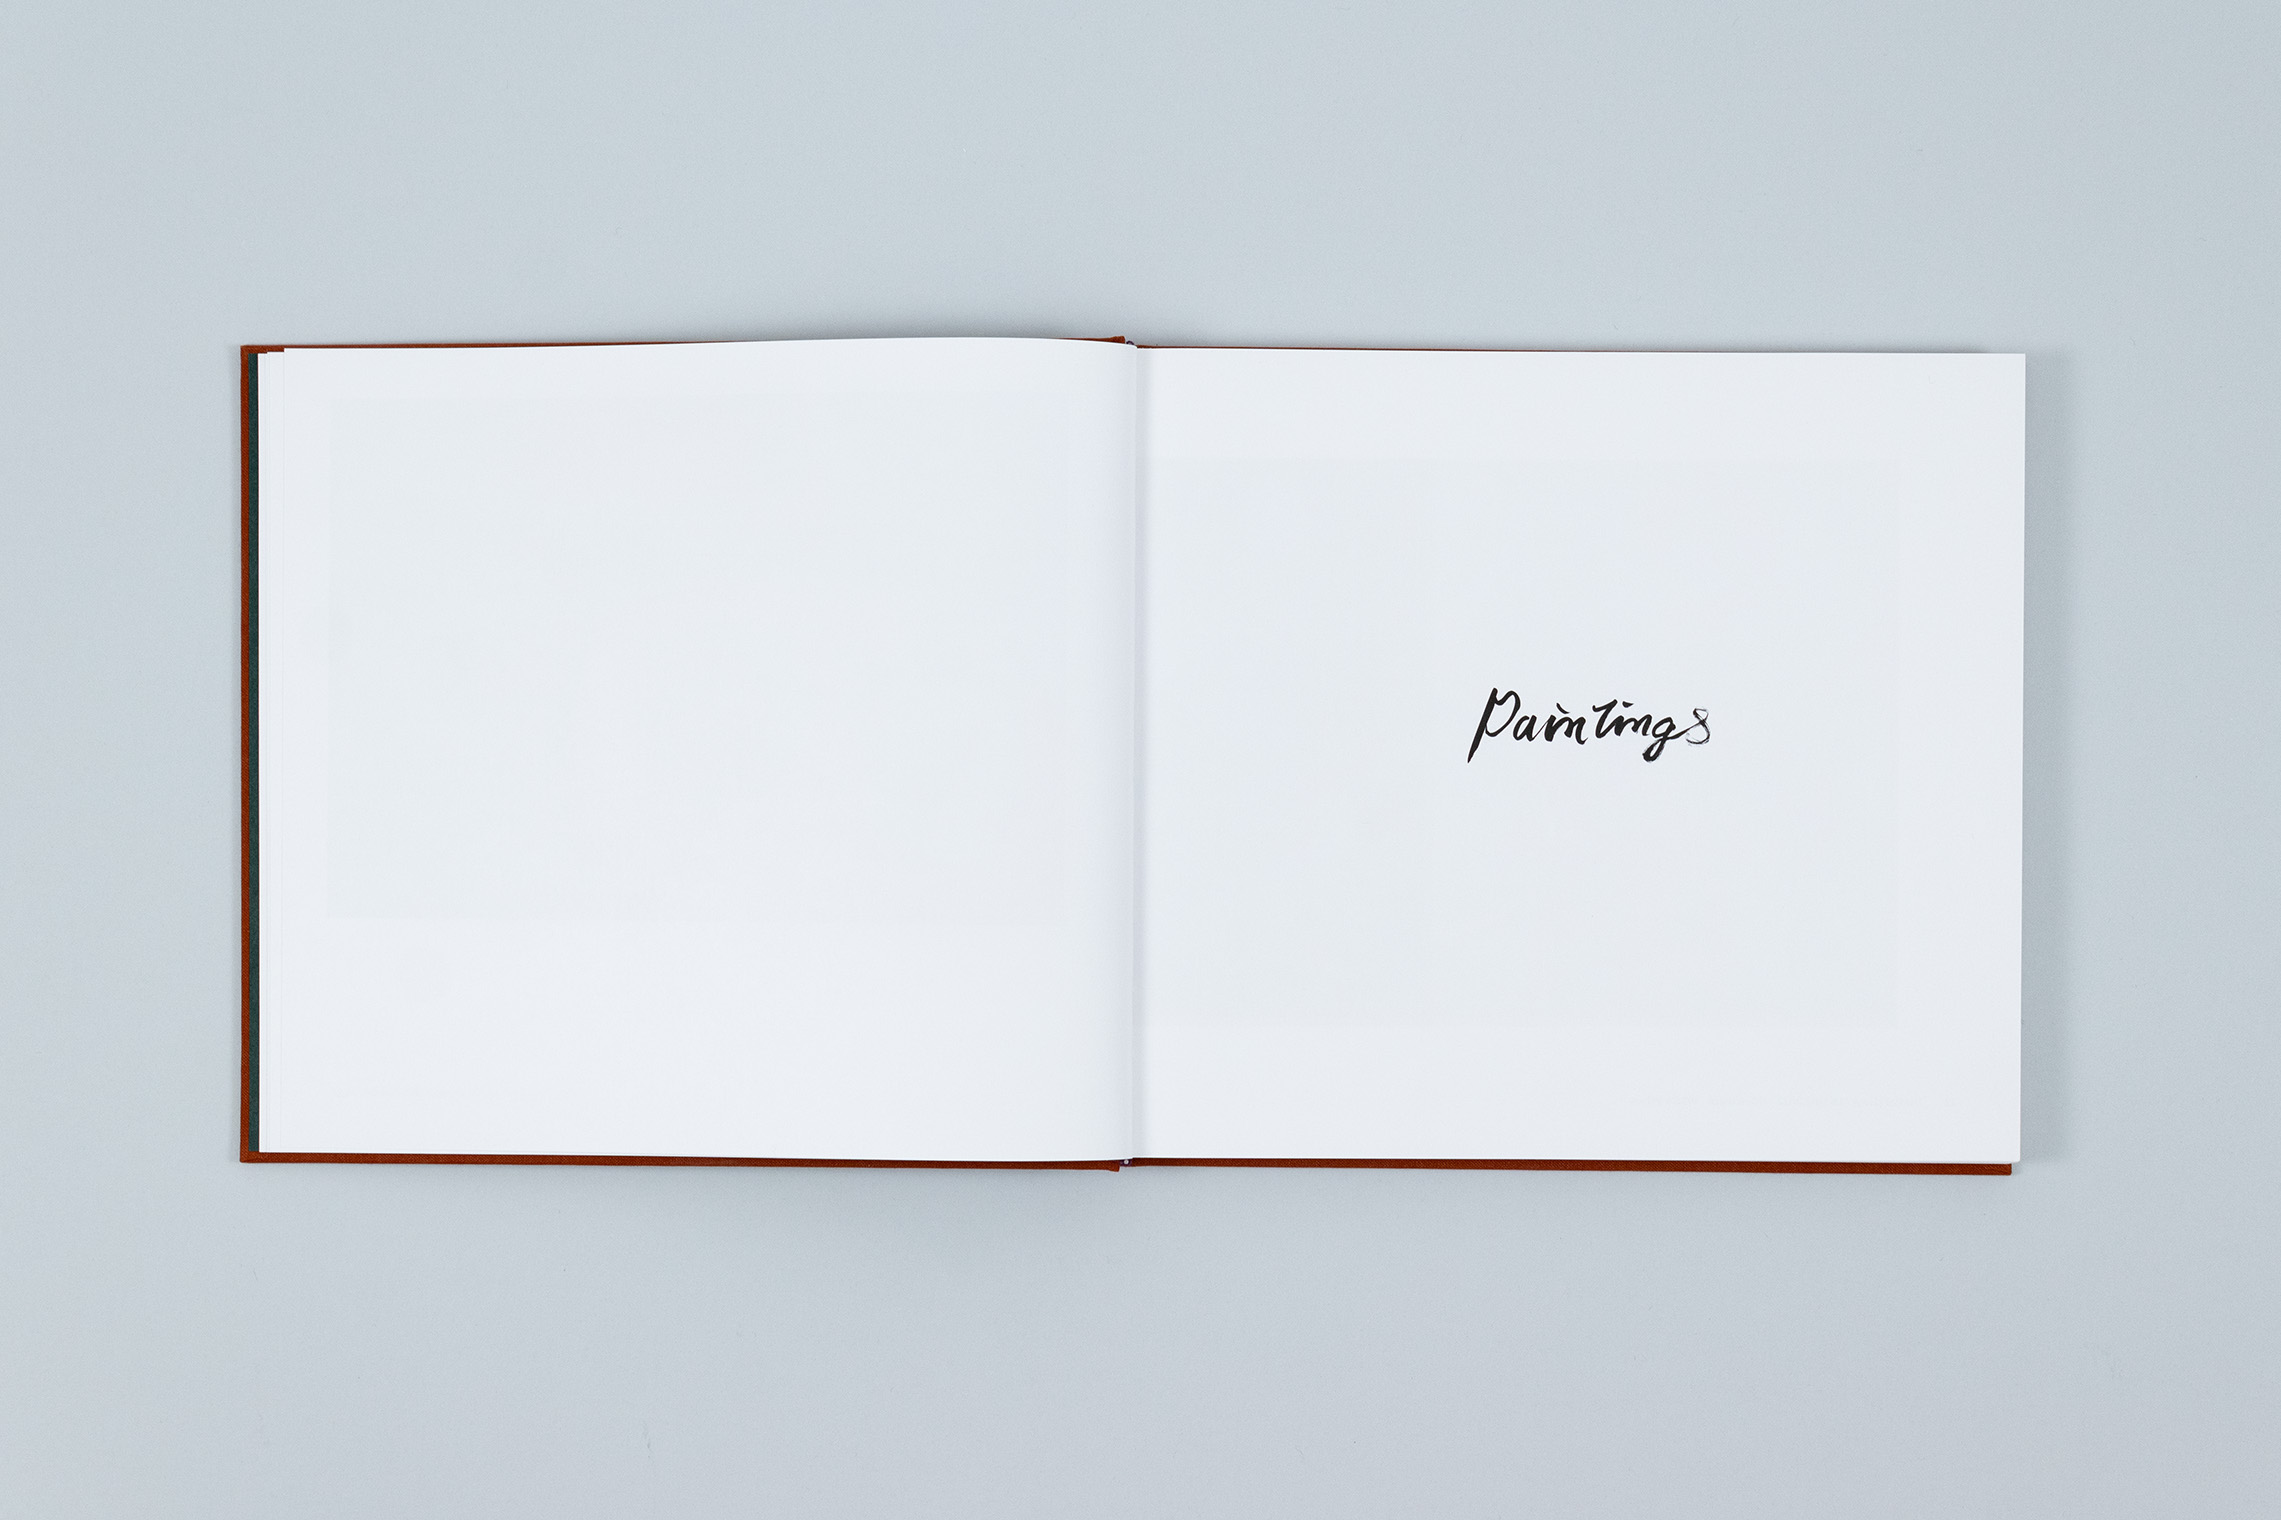 Carole Gibbons monograph spread showing the title 'Paintings' in Gibbons' handwriting